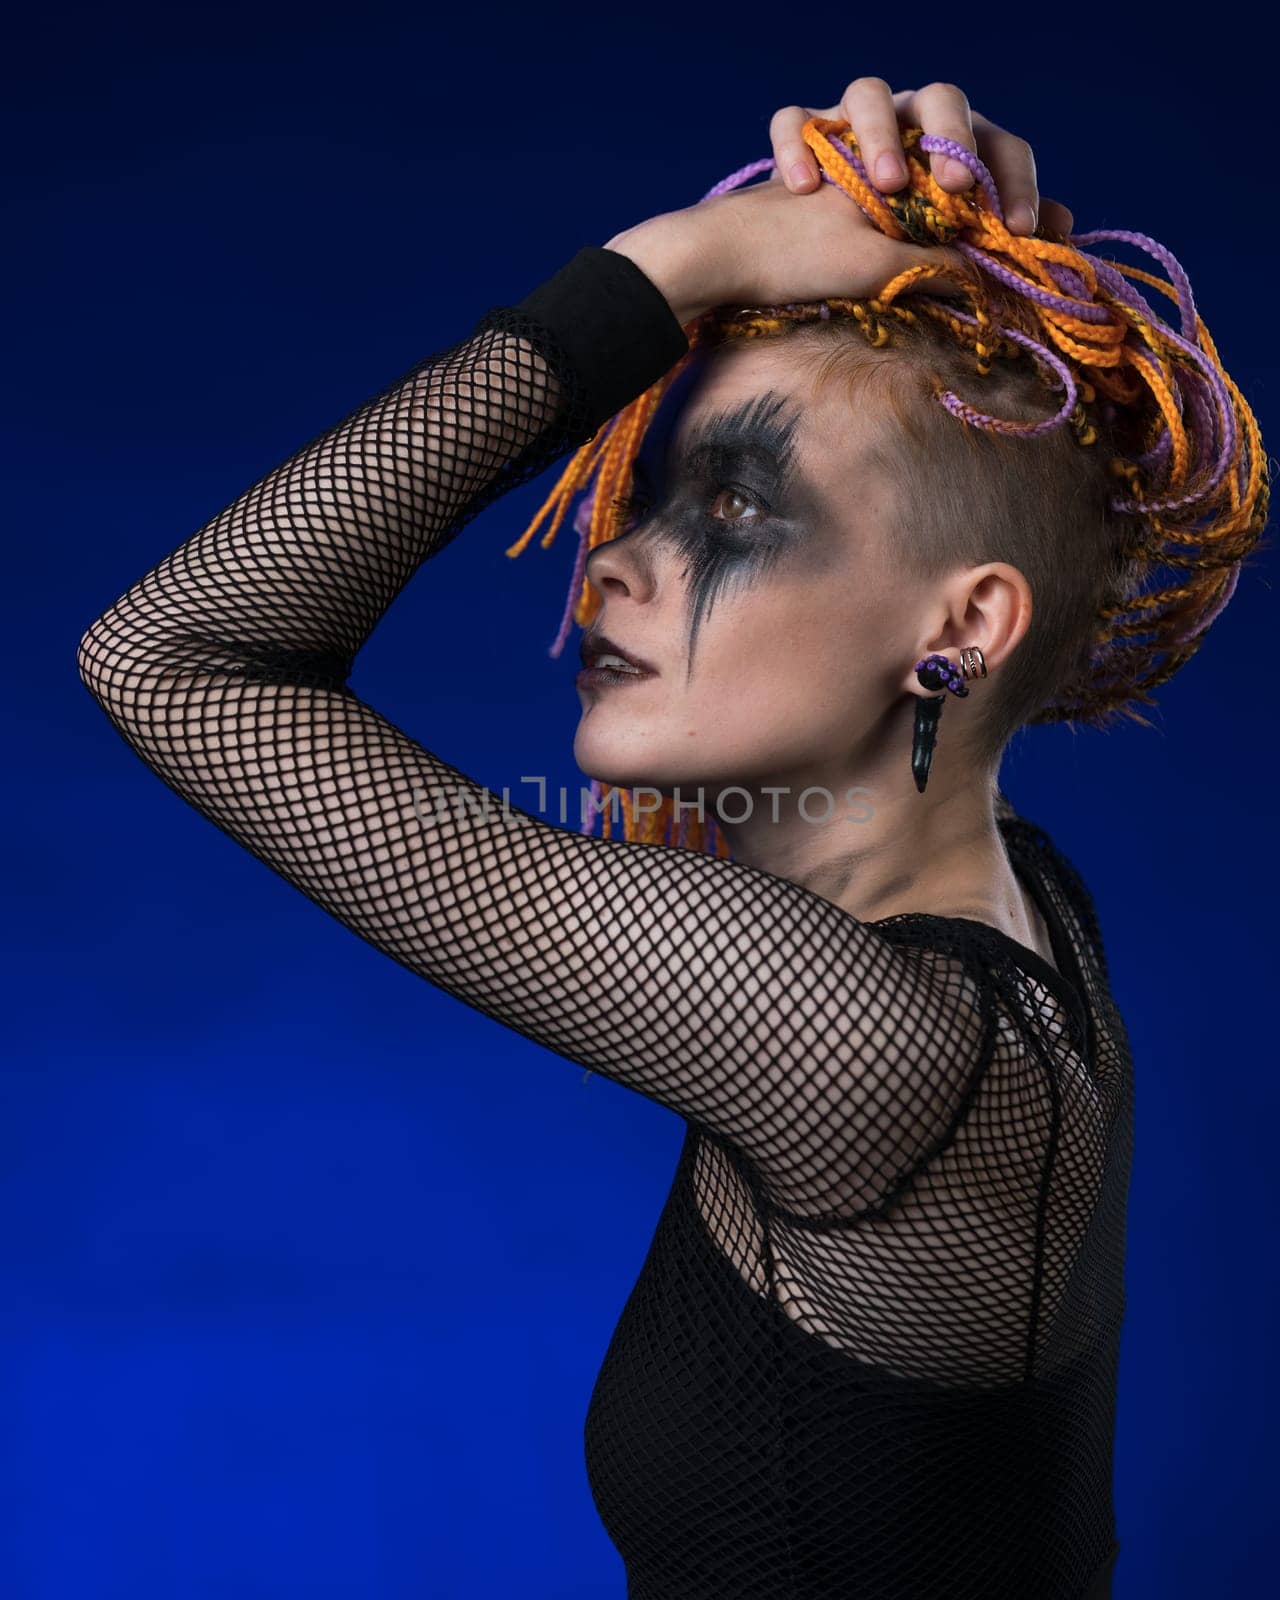 Cinematic portrait of beauty woman with colored braids hairdo and spooky stage make-up painted on face. Studio shot dramatic portrait on blue background. Part of photo series